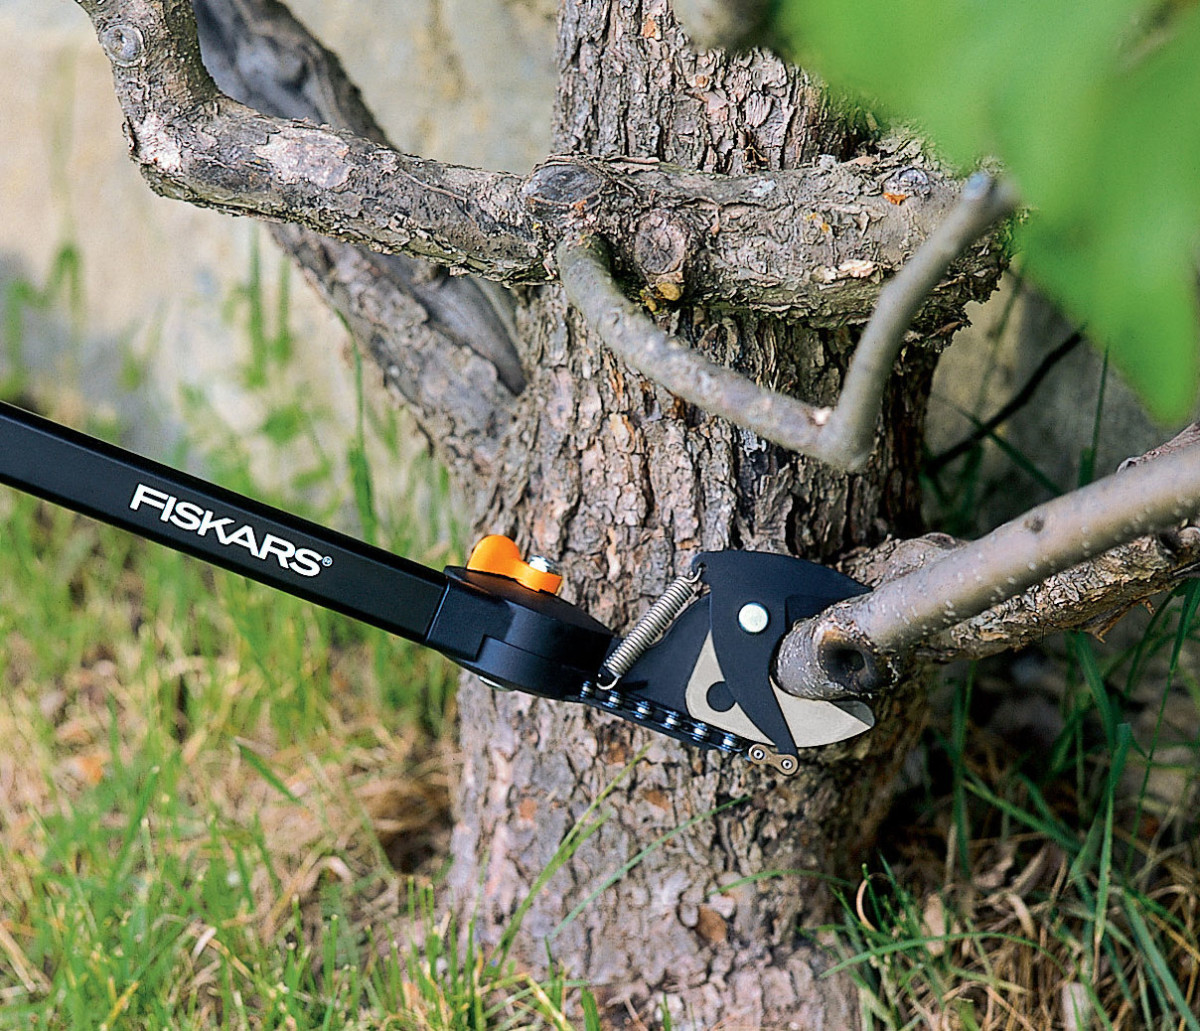 How To Use Pole Saw The 10 Best Manual Pole Pruners and Loppers for Tree Trimming - Dengarden